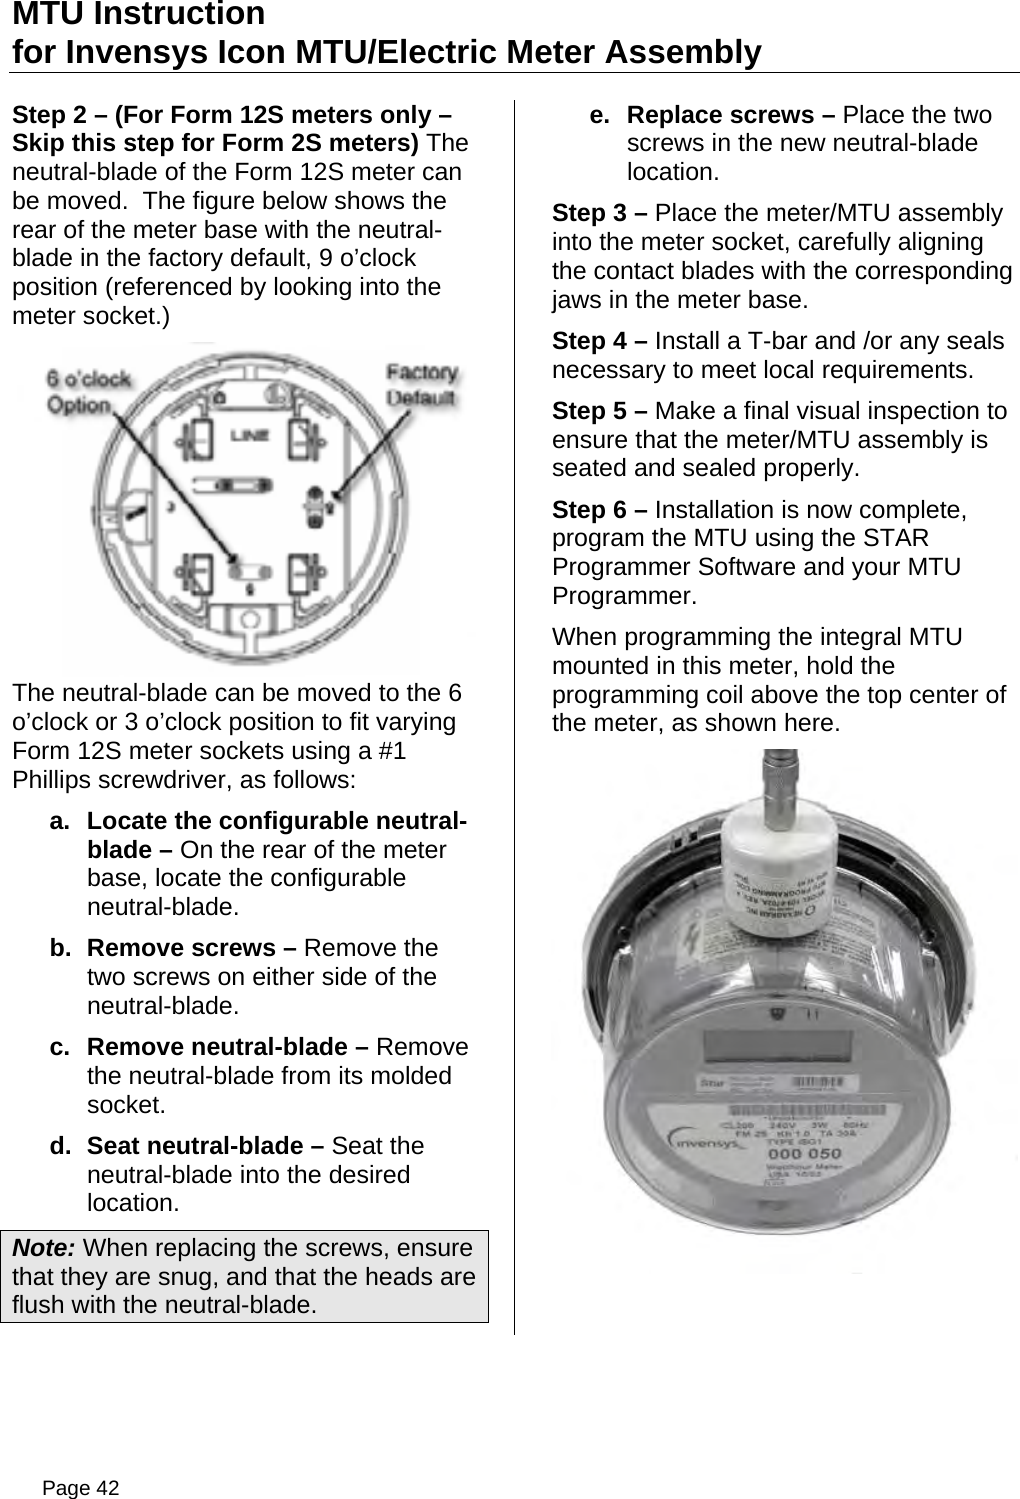 Page 42 of Aclara Technologies 09015 Transmitter for Meter Reading User Manual users manual